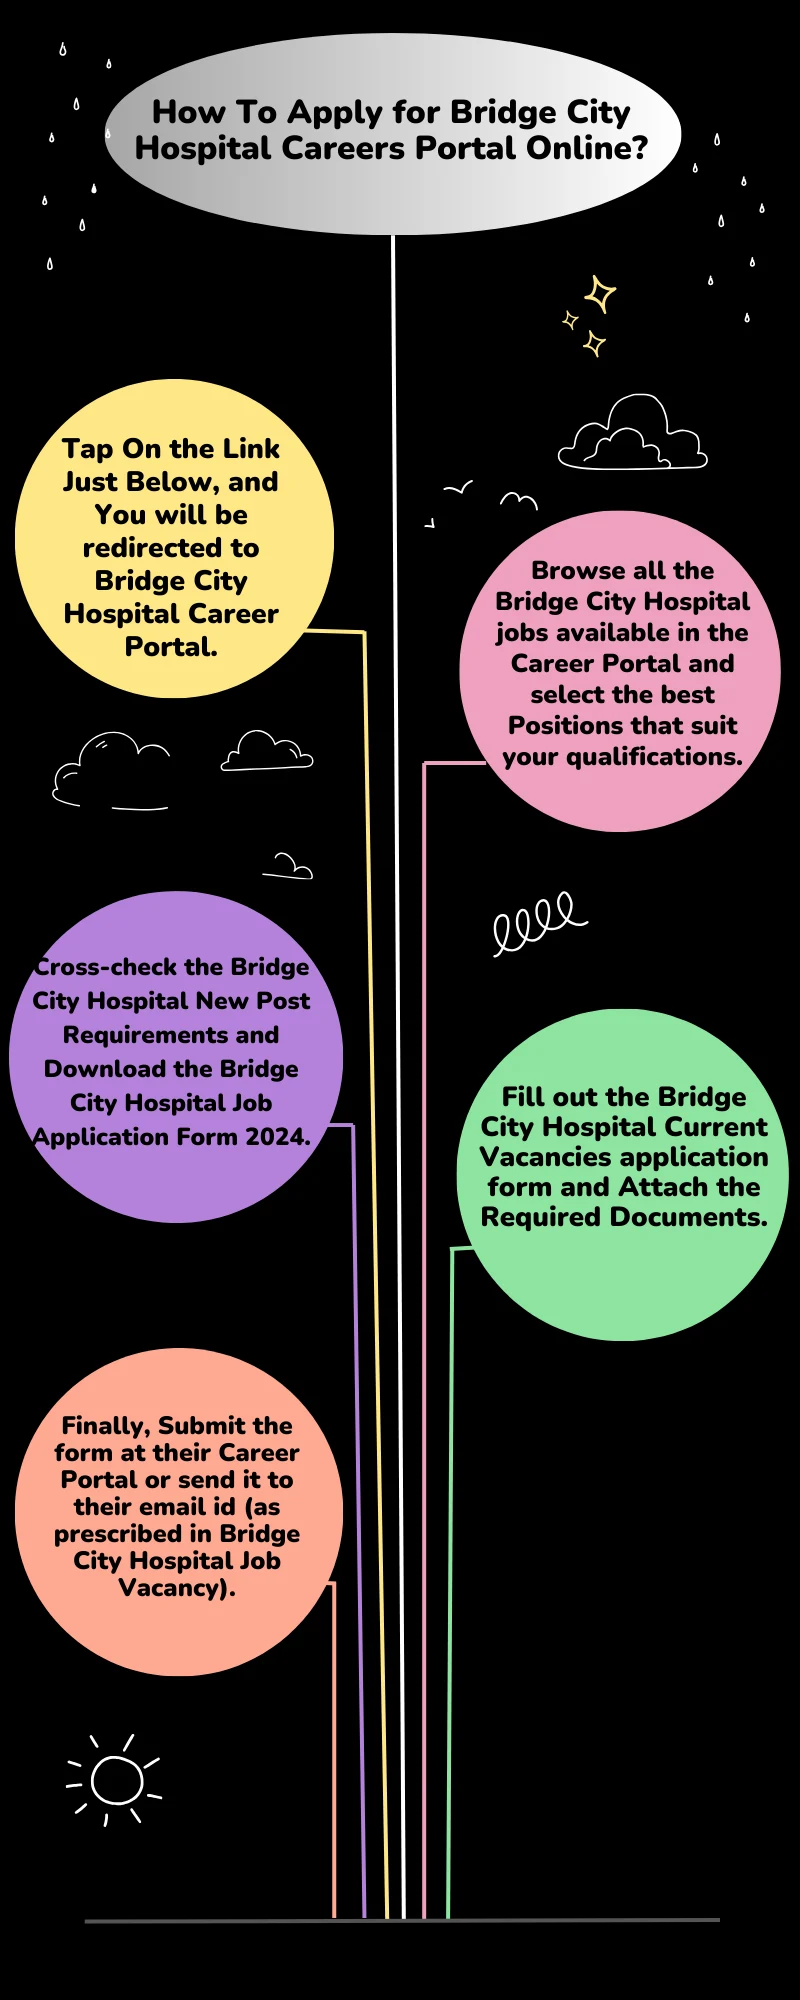 How To Apply for Bridge City Hospital Careers Portal Online 2 1